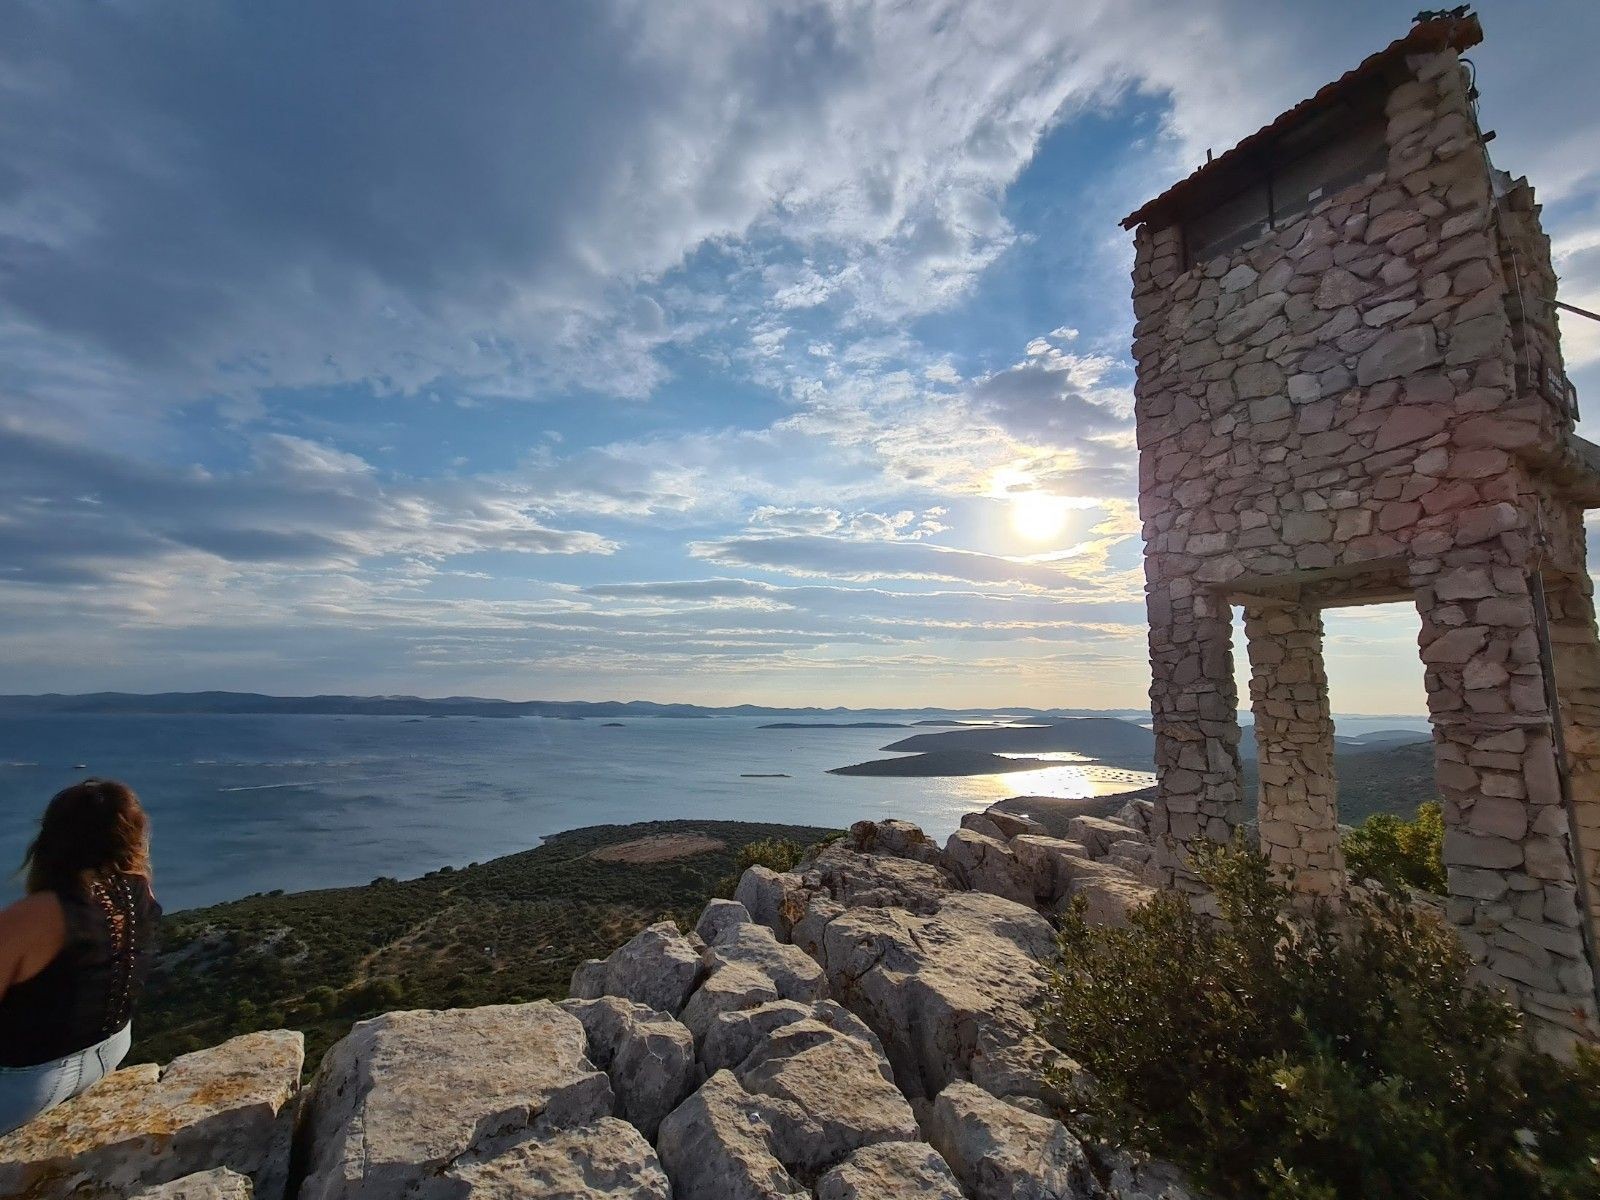 Enjoy beautiful views from many viewpoints on island